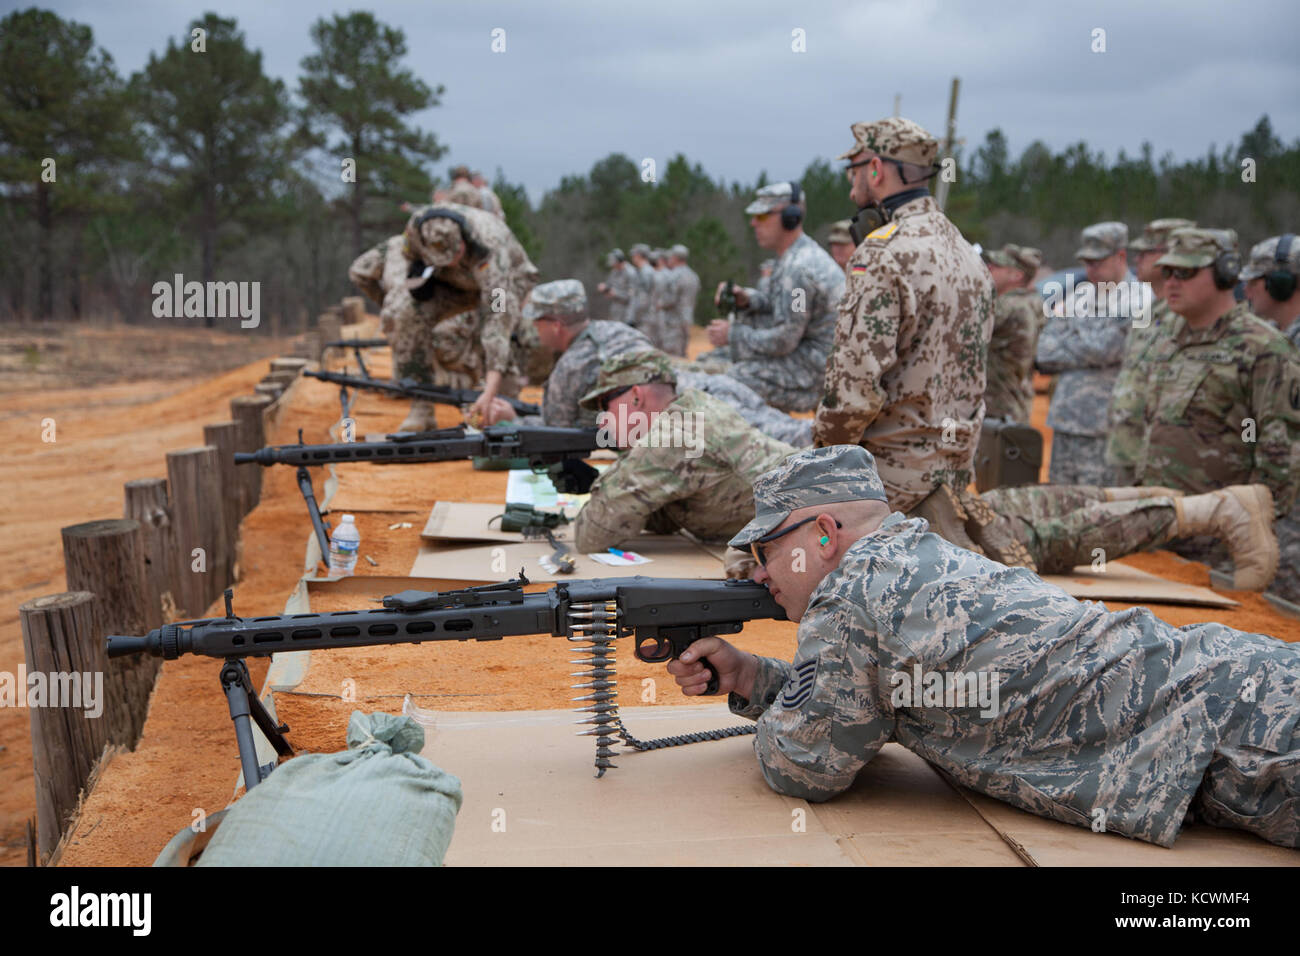 South Carolina National Guard Soldiers and Airmen participate in a live-fire German Proficiency Marksmanship Badge qualification at Fort Jackson, South Carolina with the assistance of Soldiers from the German Armed Forces Command, Mar. 8, 2017. The South Carolina National Guard service members utilized the German MG 3 machine gun, P8 pistol, and G36 assault rifle during the event. (U.S. Army National Guard photo by Capt. Brian Hare) Stock Photo